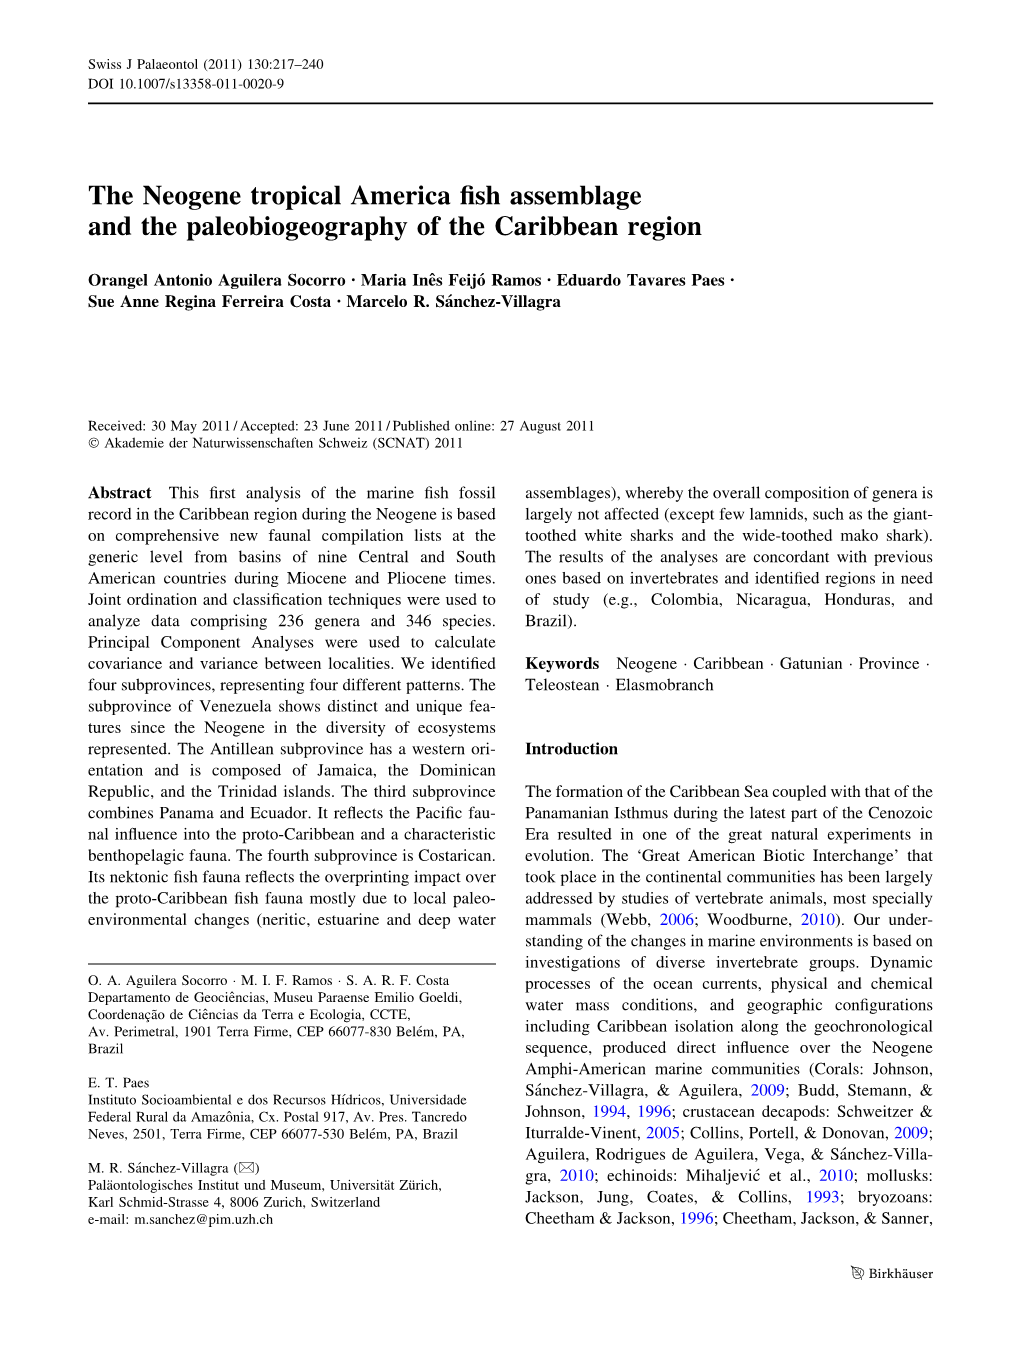 The Neogene Tropical America Fish Assemblage and The